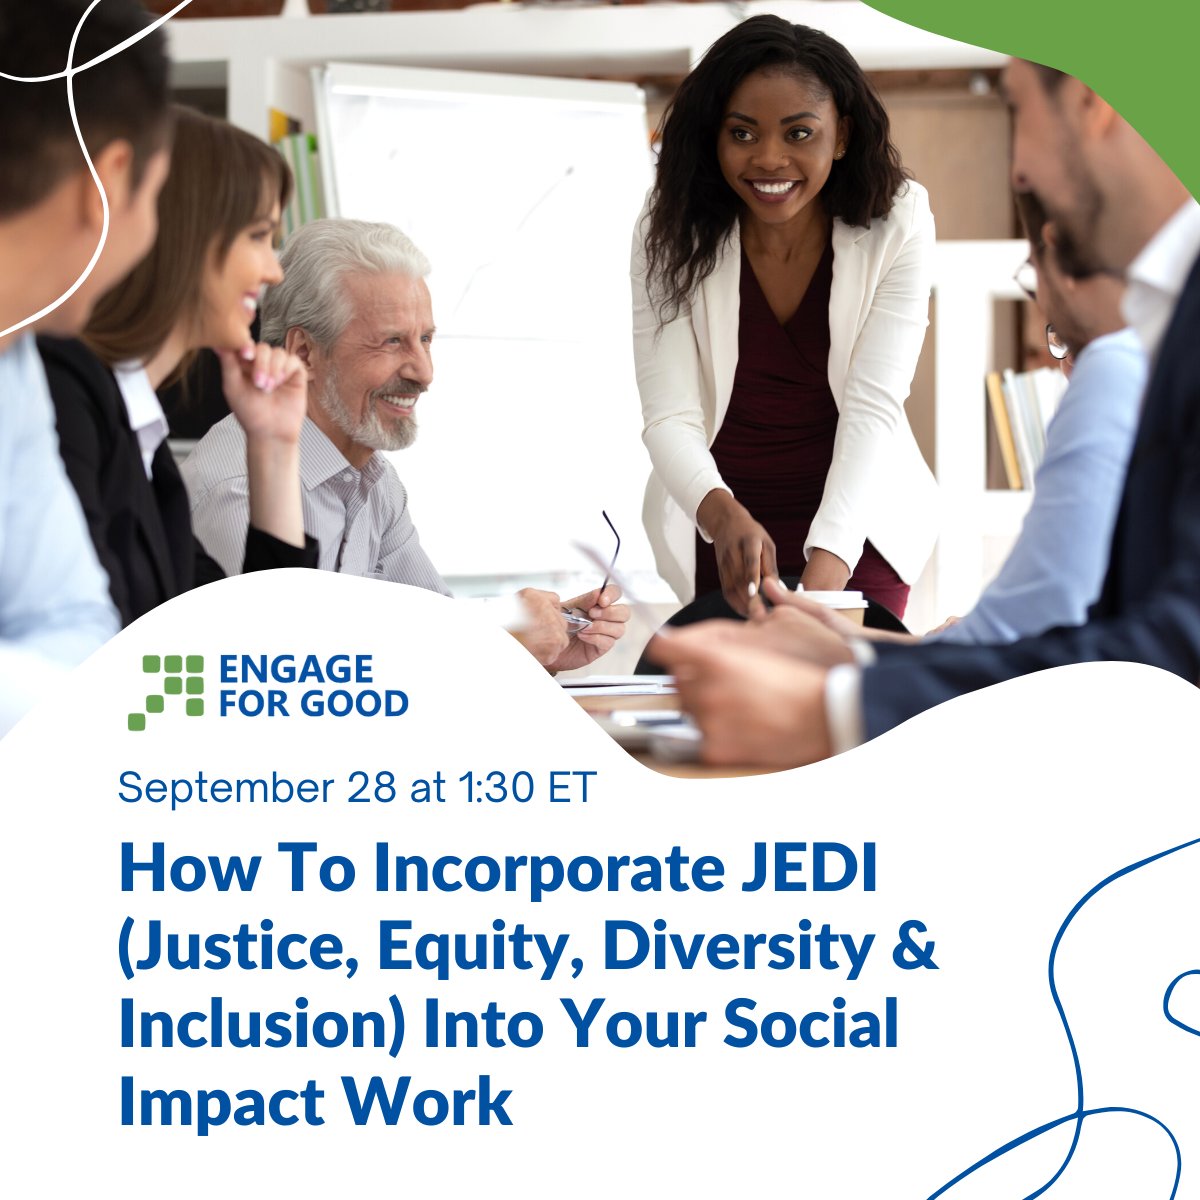 Is #JEDI (justice, equity, diversity and inclusion) a key focus of your organization? Join this webinar to learn how to benchmark your organization’s ability to create an environment in which JEDI ideals thrive! engageforgood.com/how-to-incorpo…